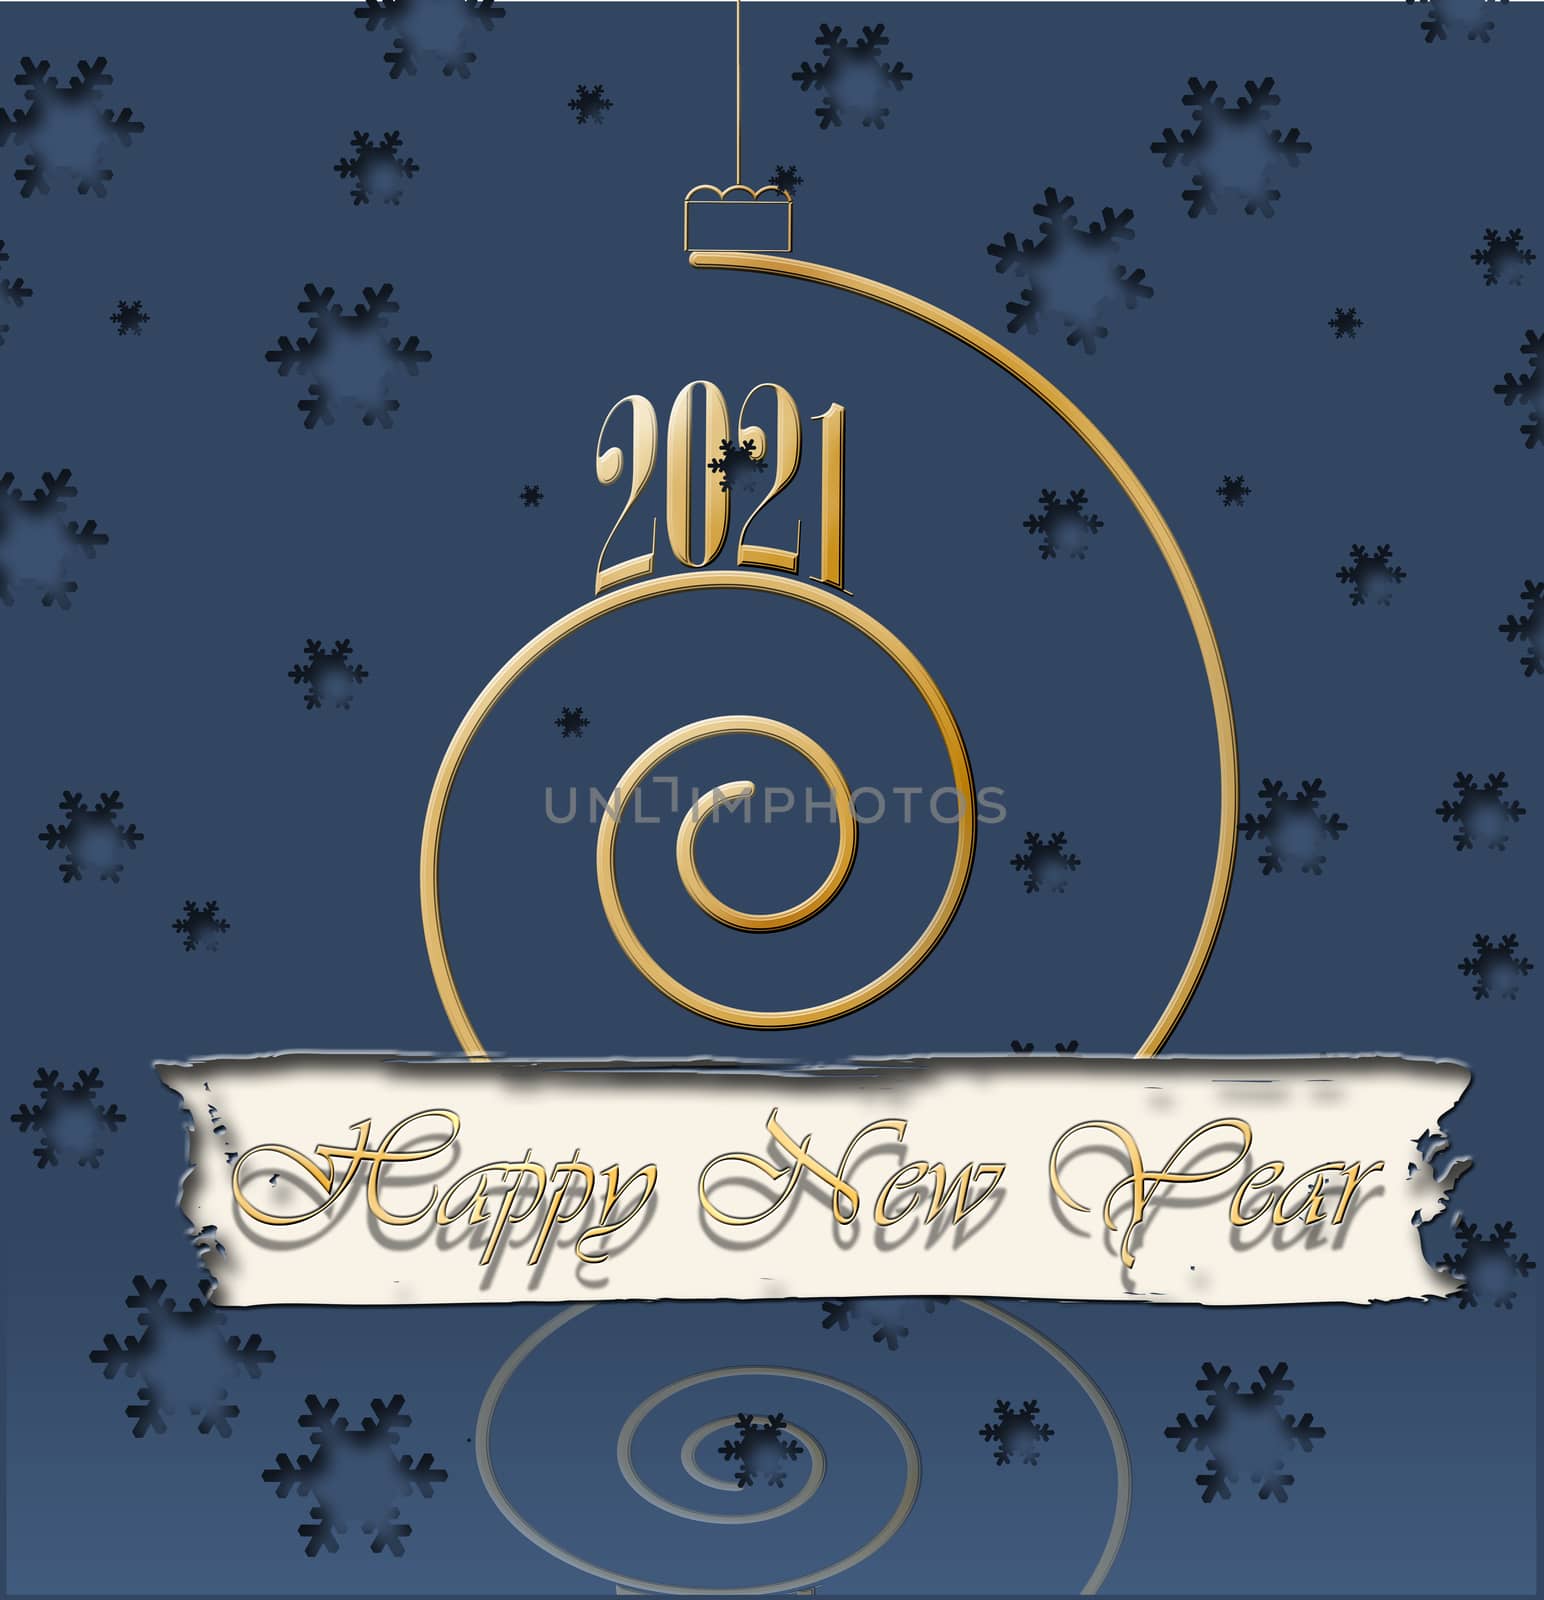 2021 Merry Christmas happy new year gold spiral shape. by NelliPolk